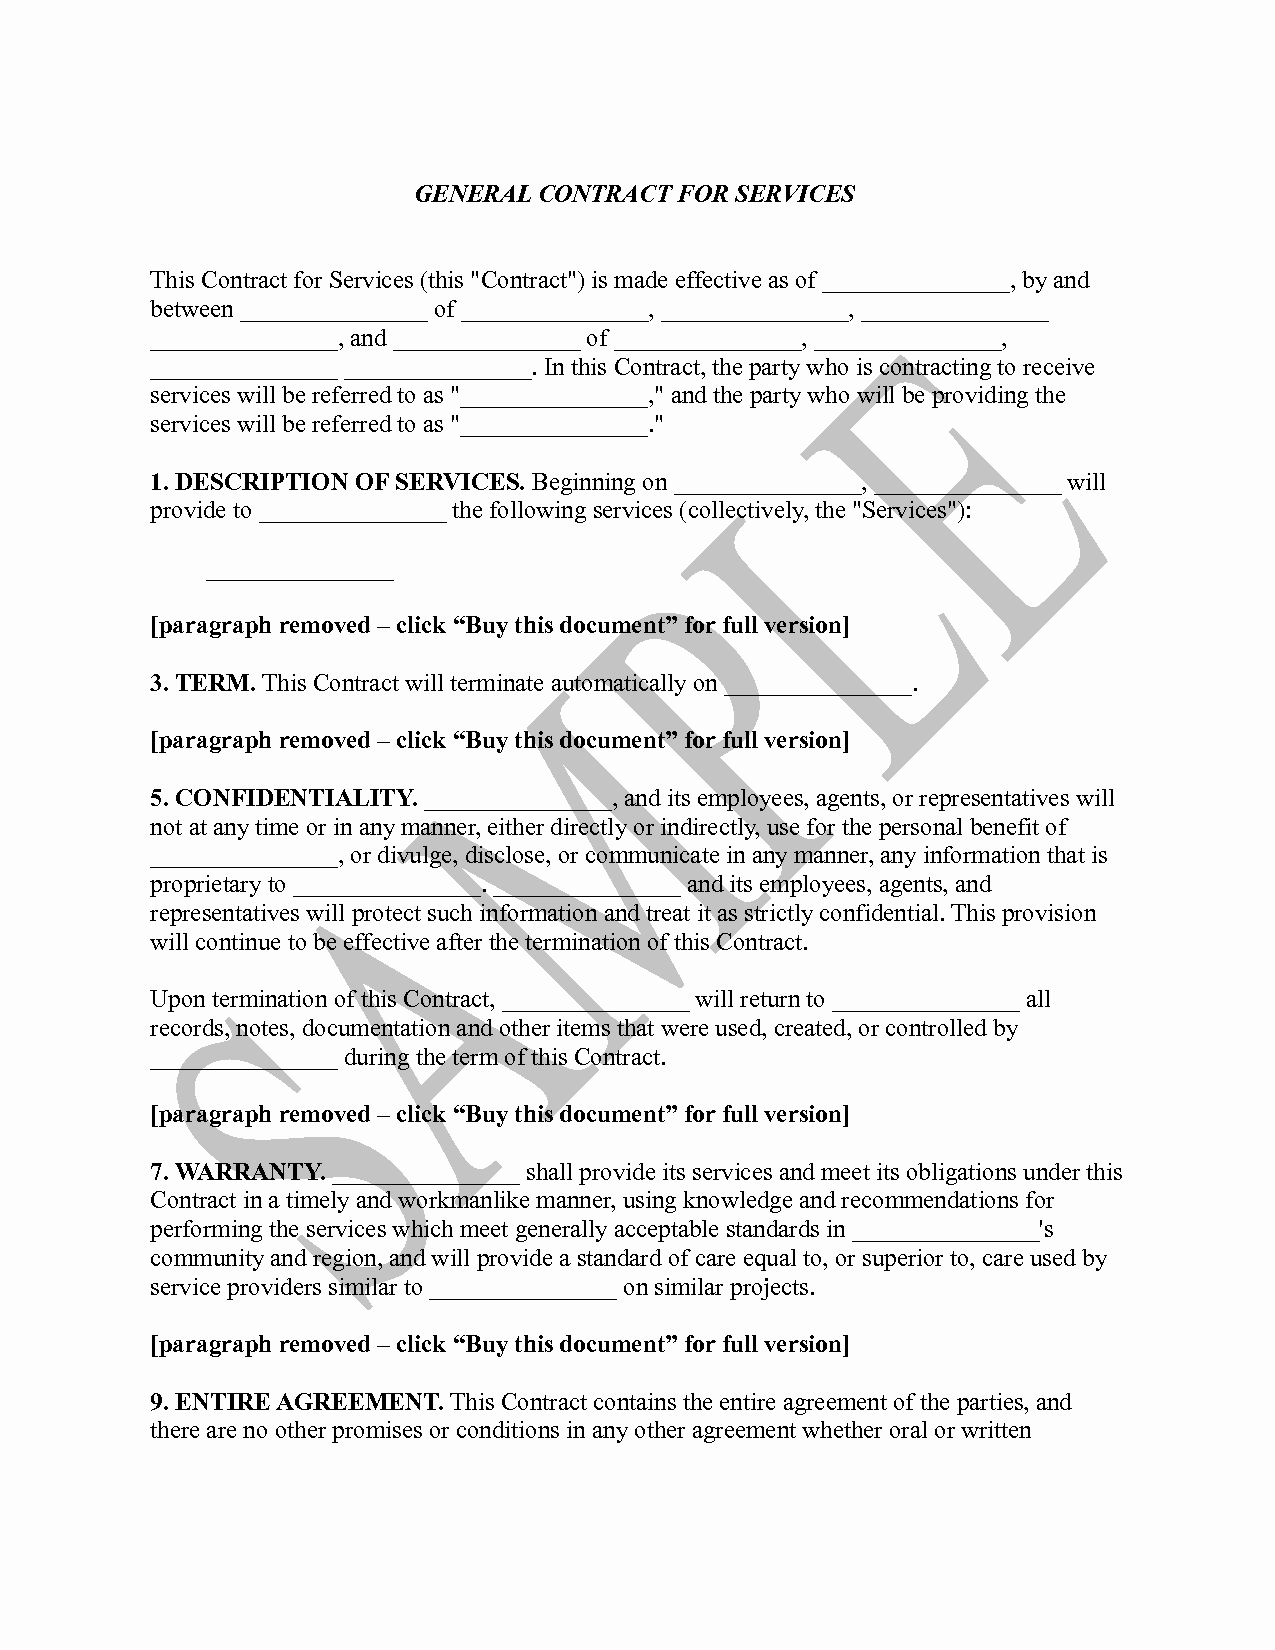 General Contract for Services Template Free Printable